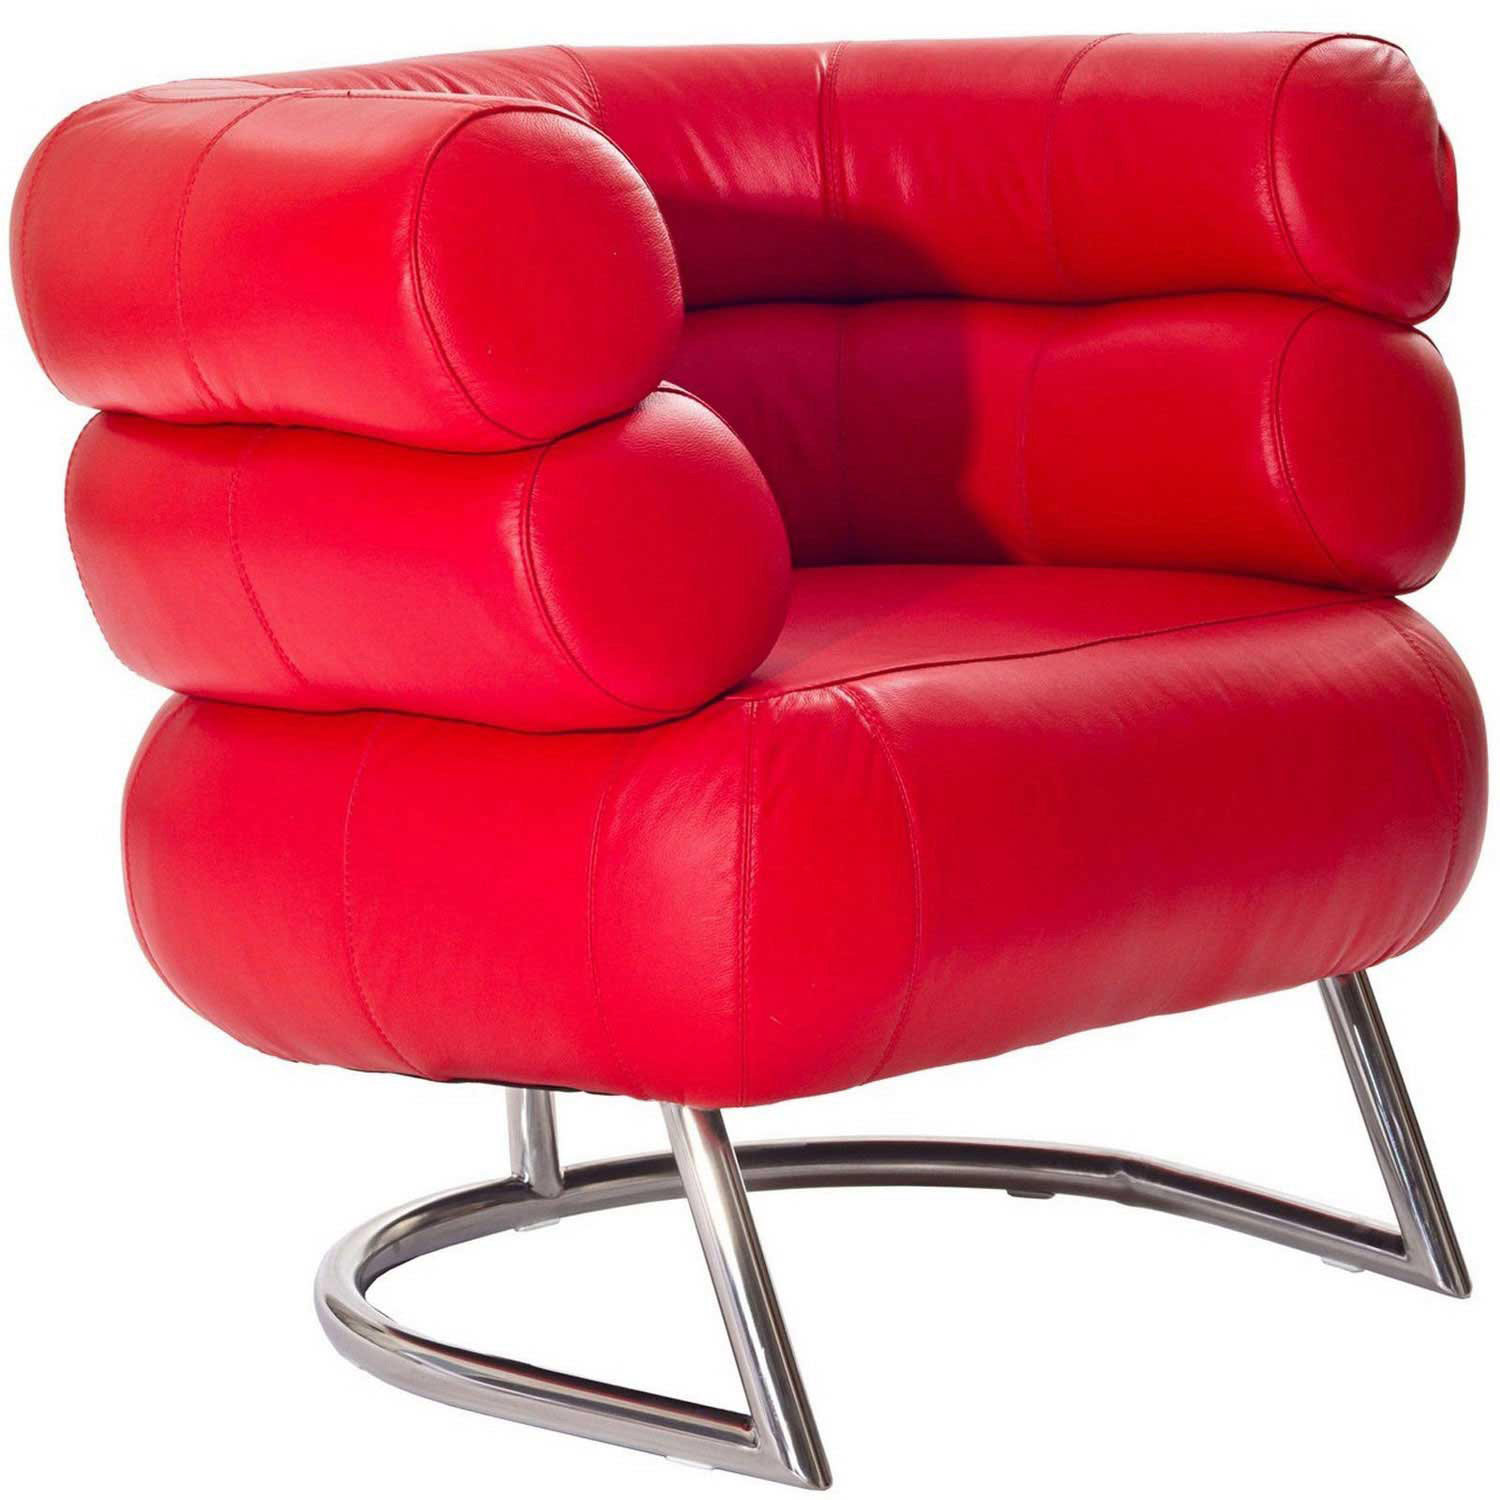 Modway Michelin Arm Chair - Red